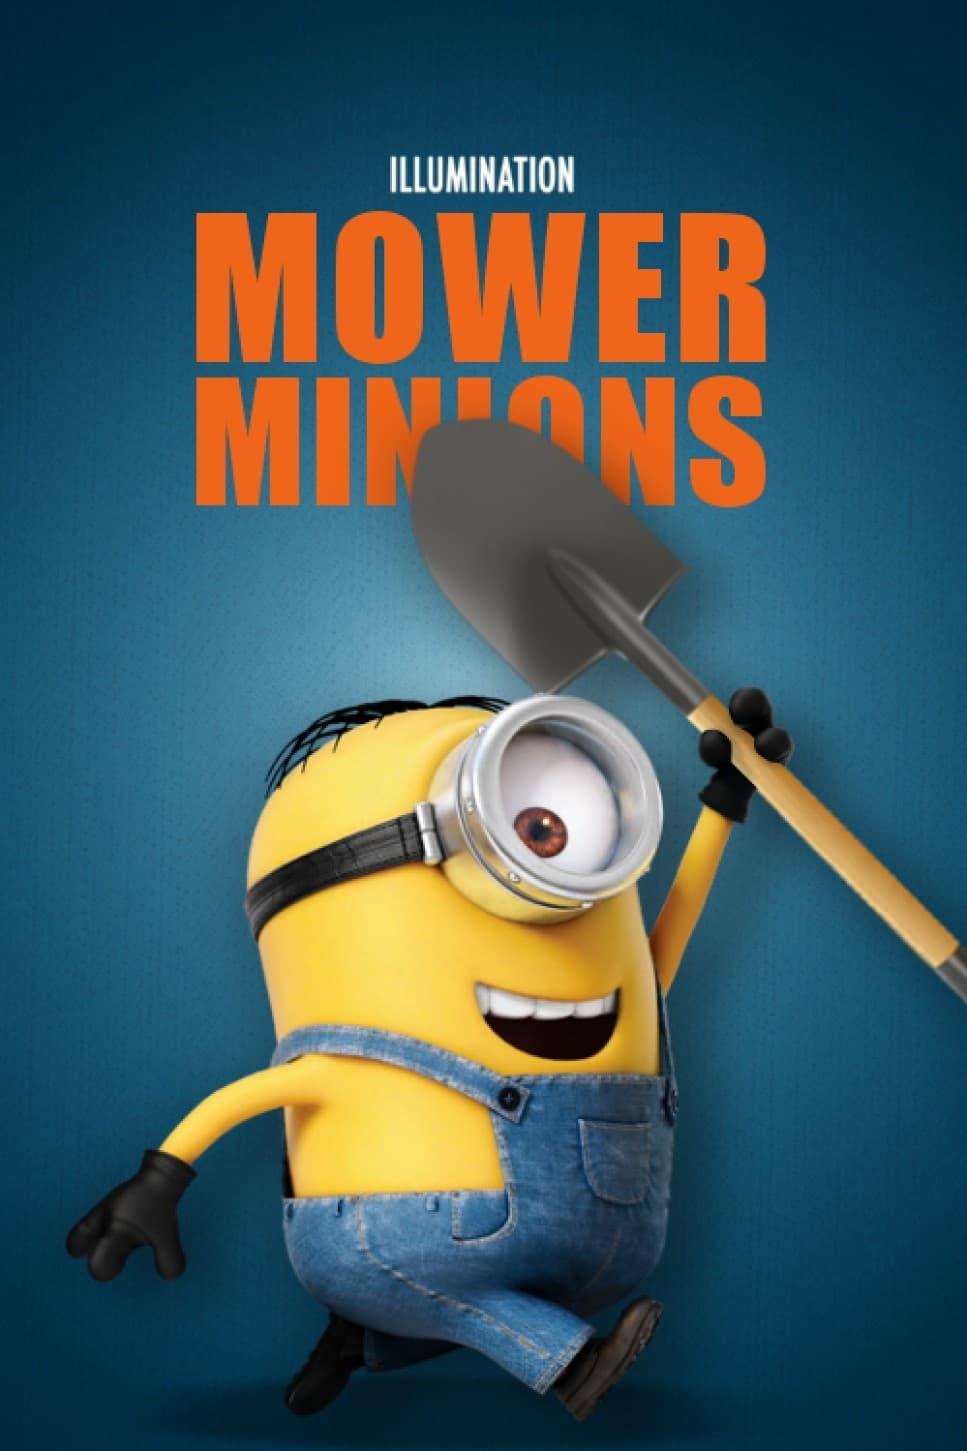 Mower Minions poster